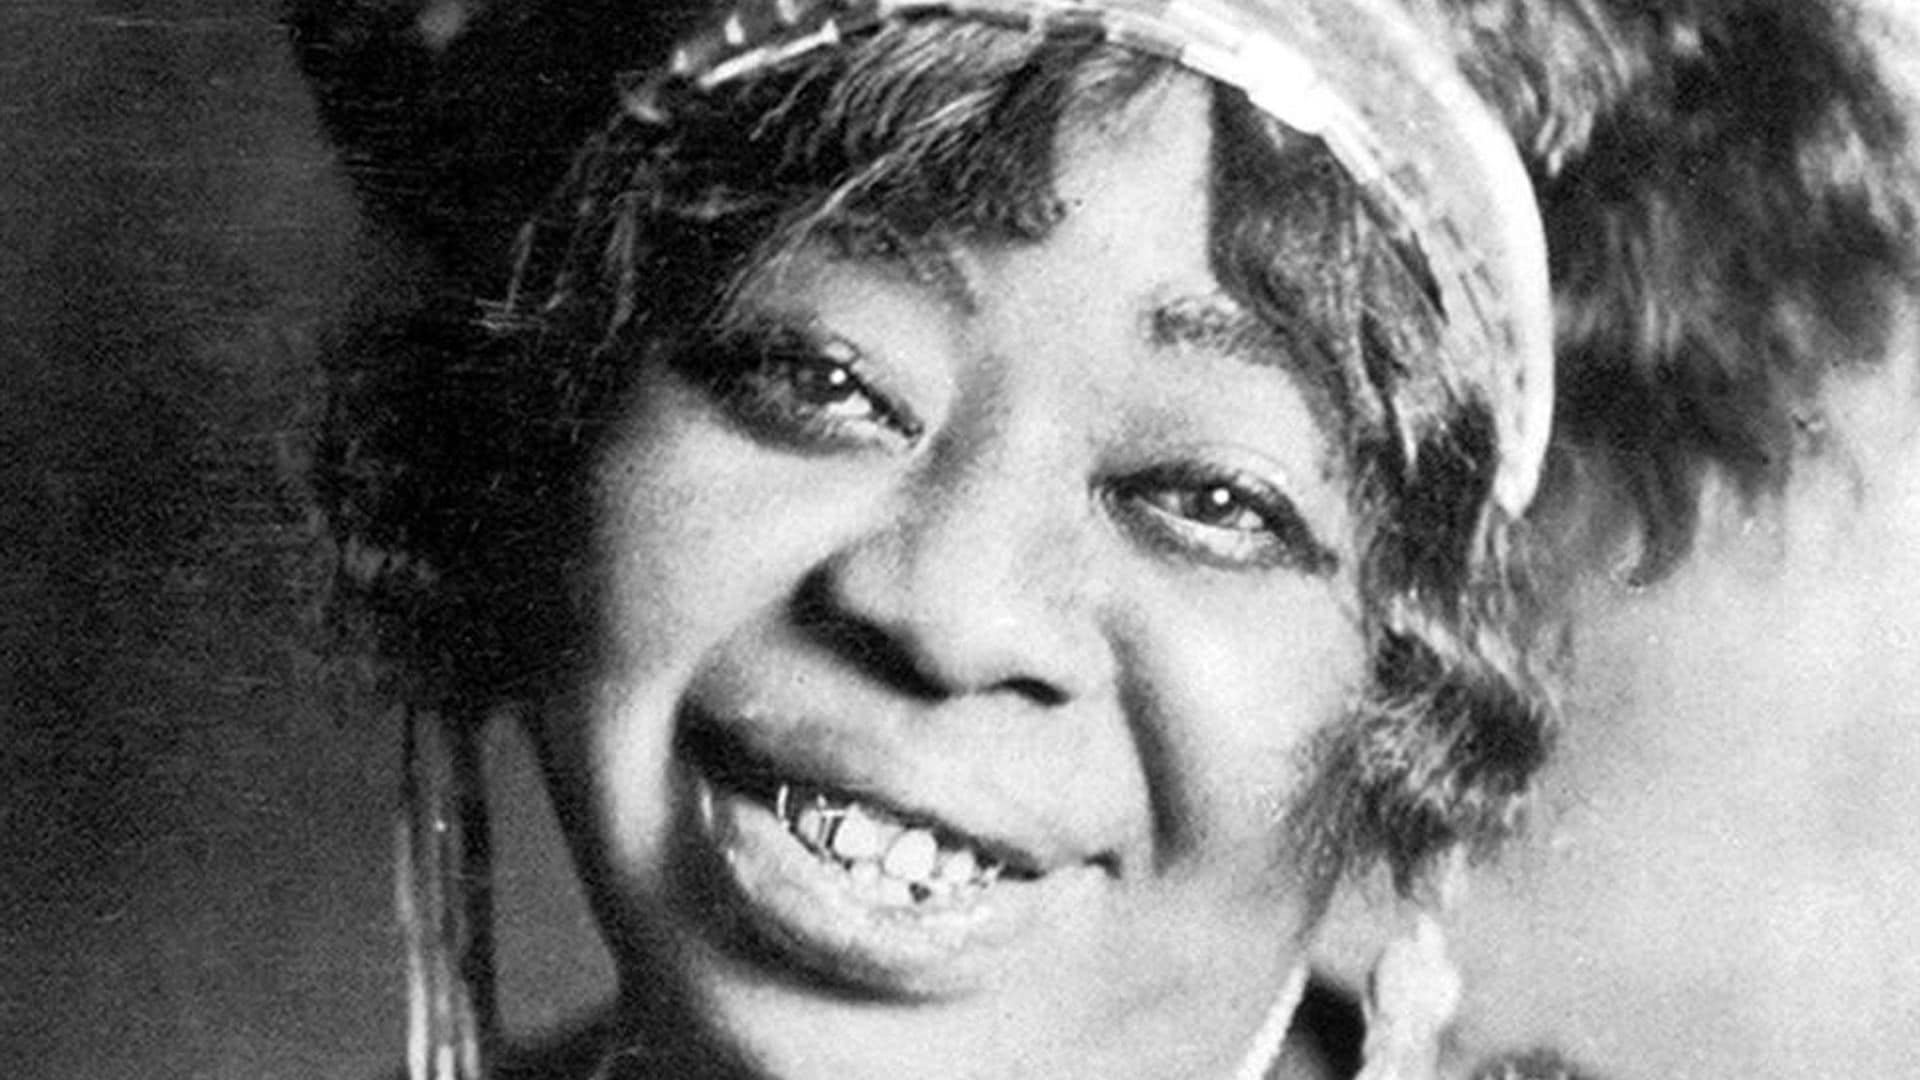 How Ma Rainey became the ‘Mother of the Blues’ and transformed the genre